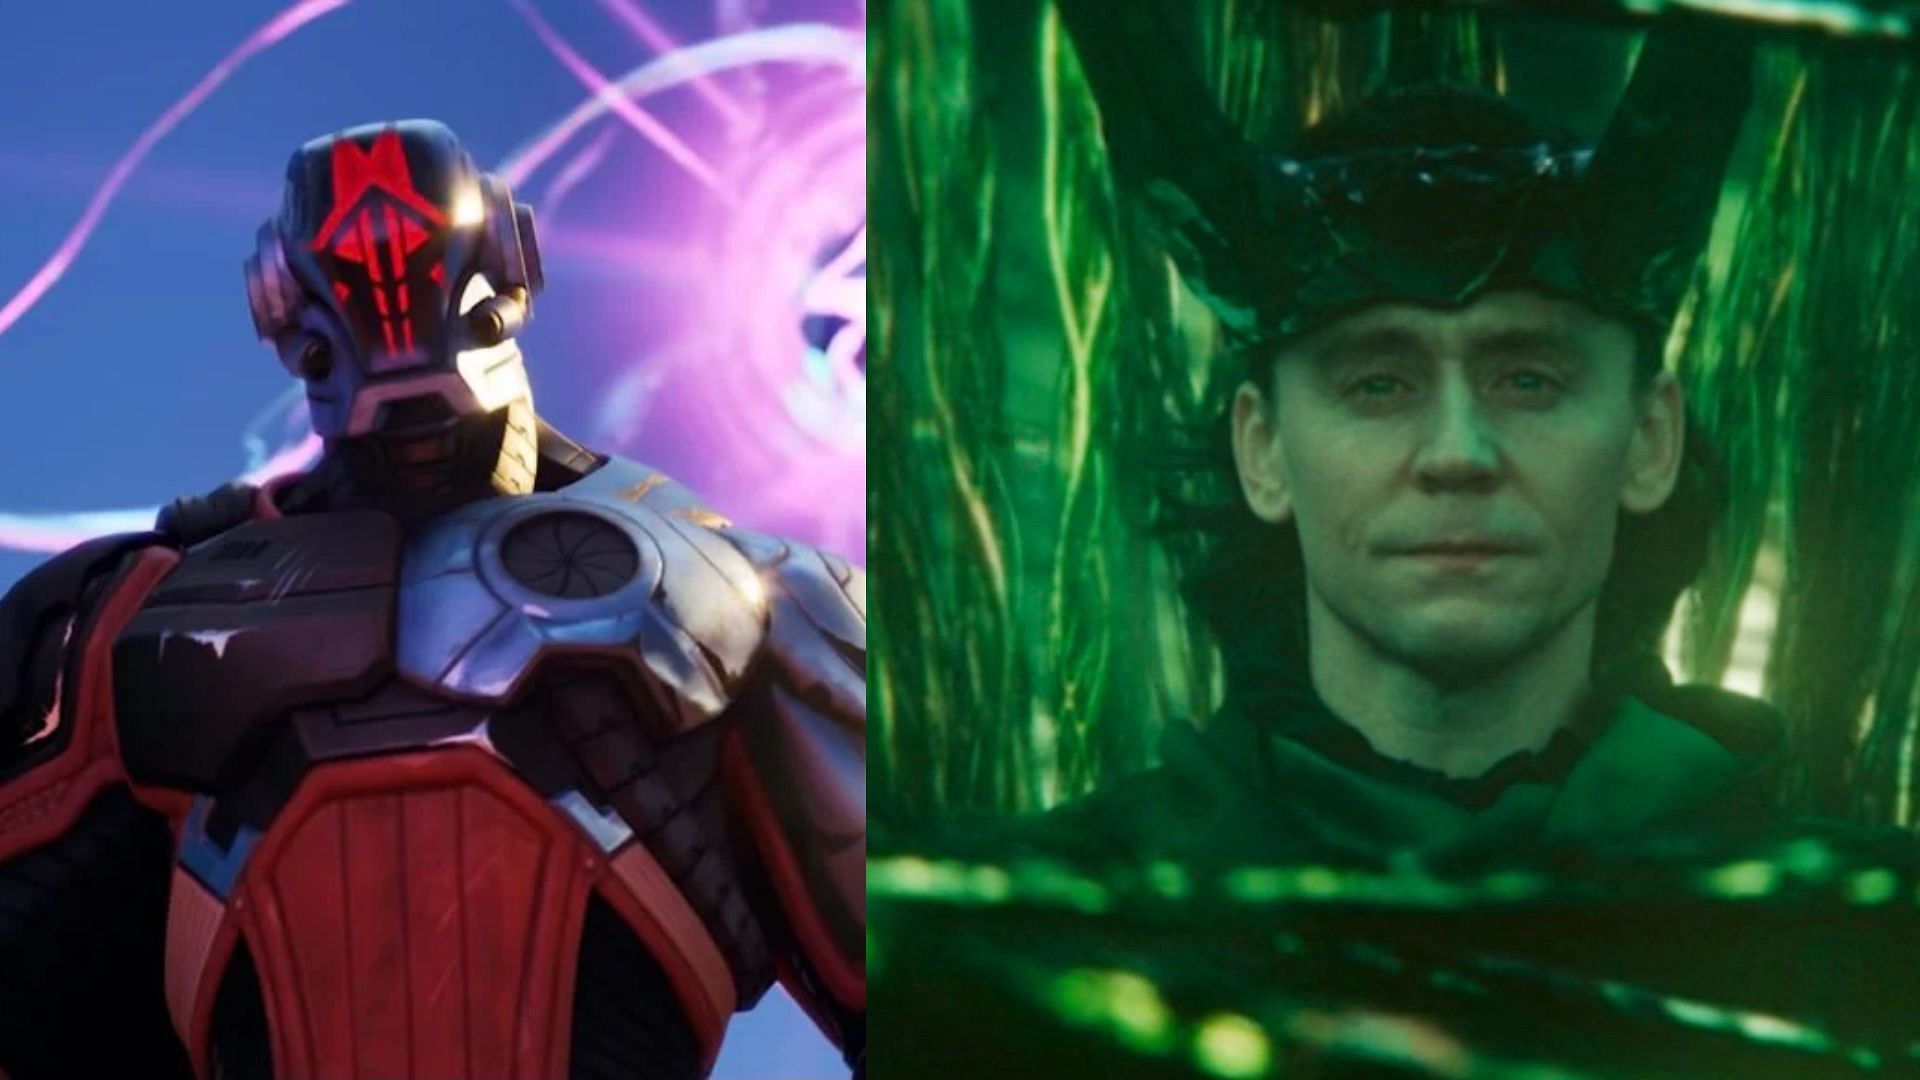 Loki seemingly took inspiration from Fortnite and the Foundation